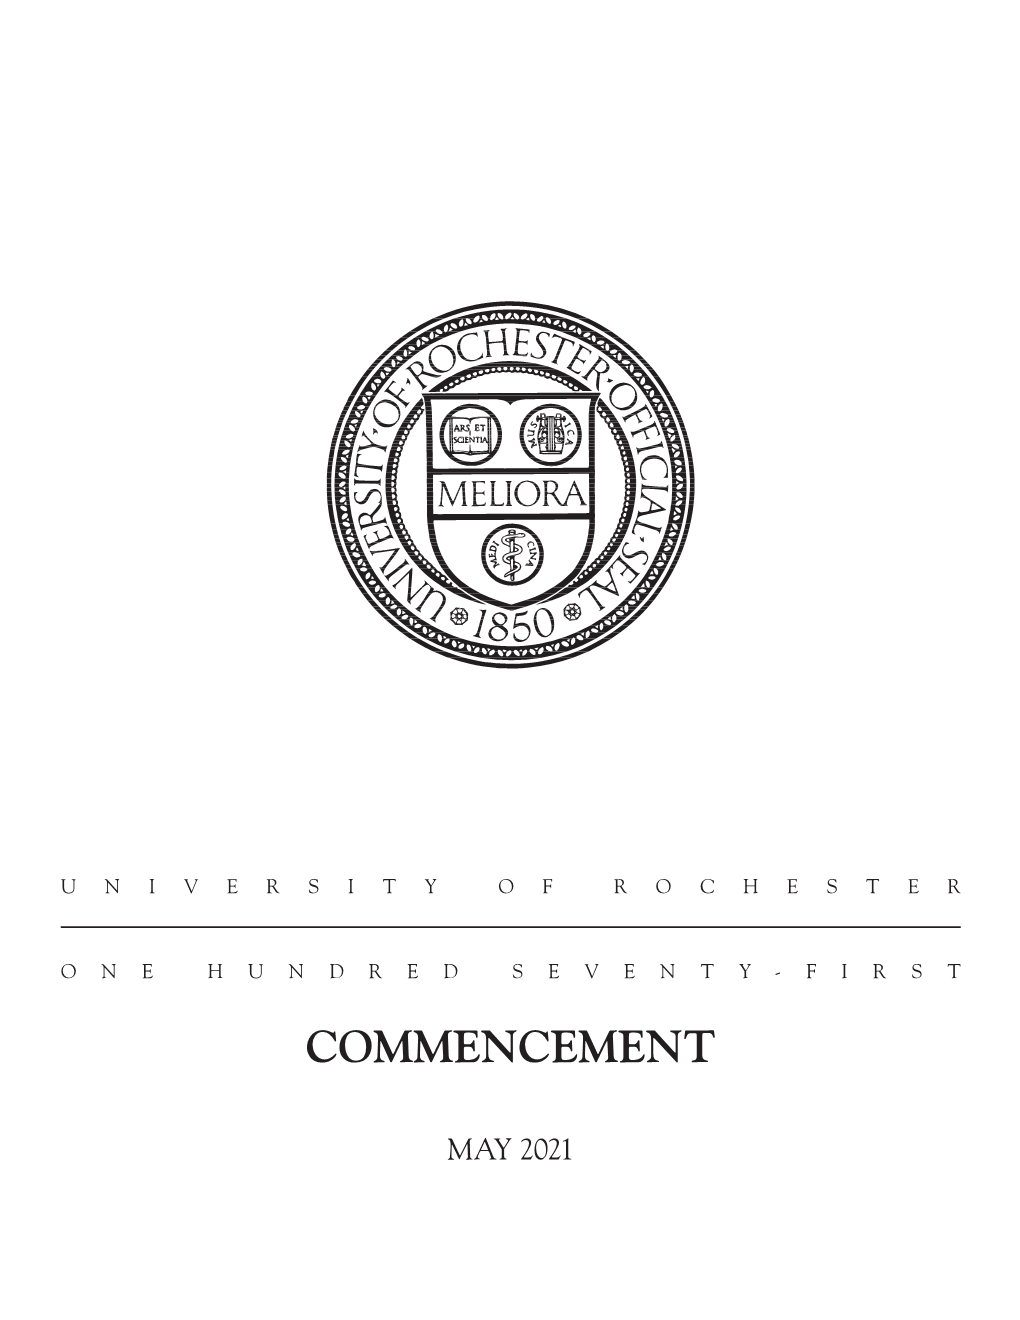 Download the 2021 Commencement Book